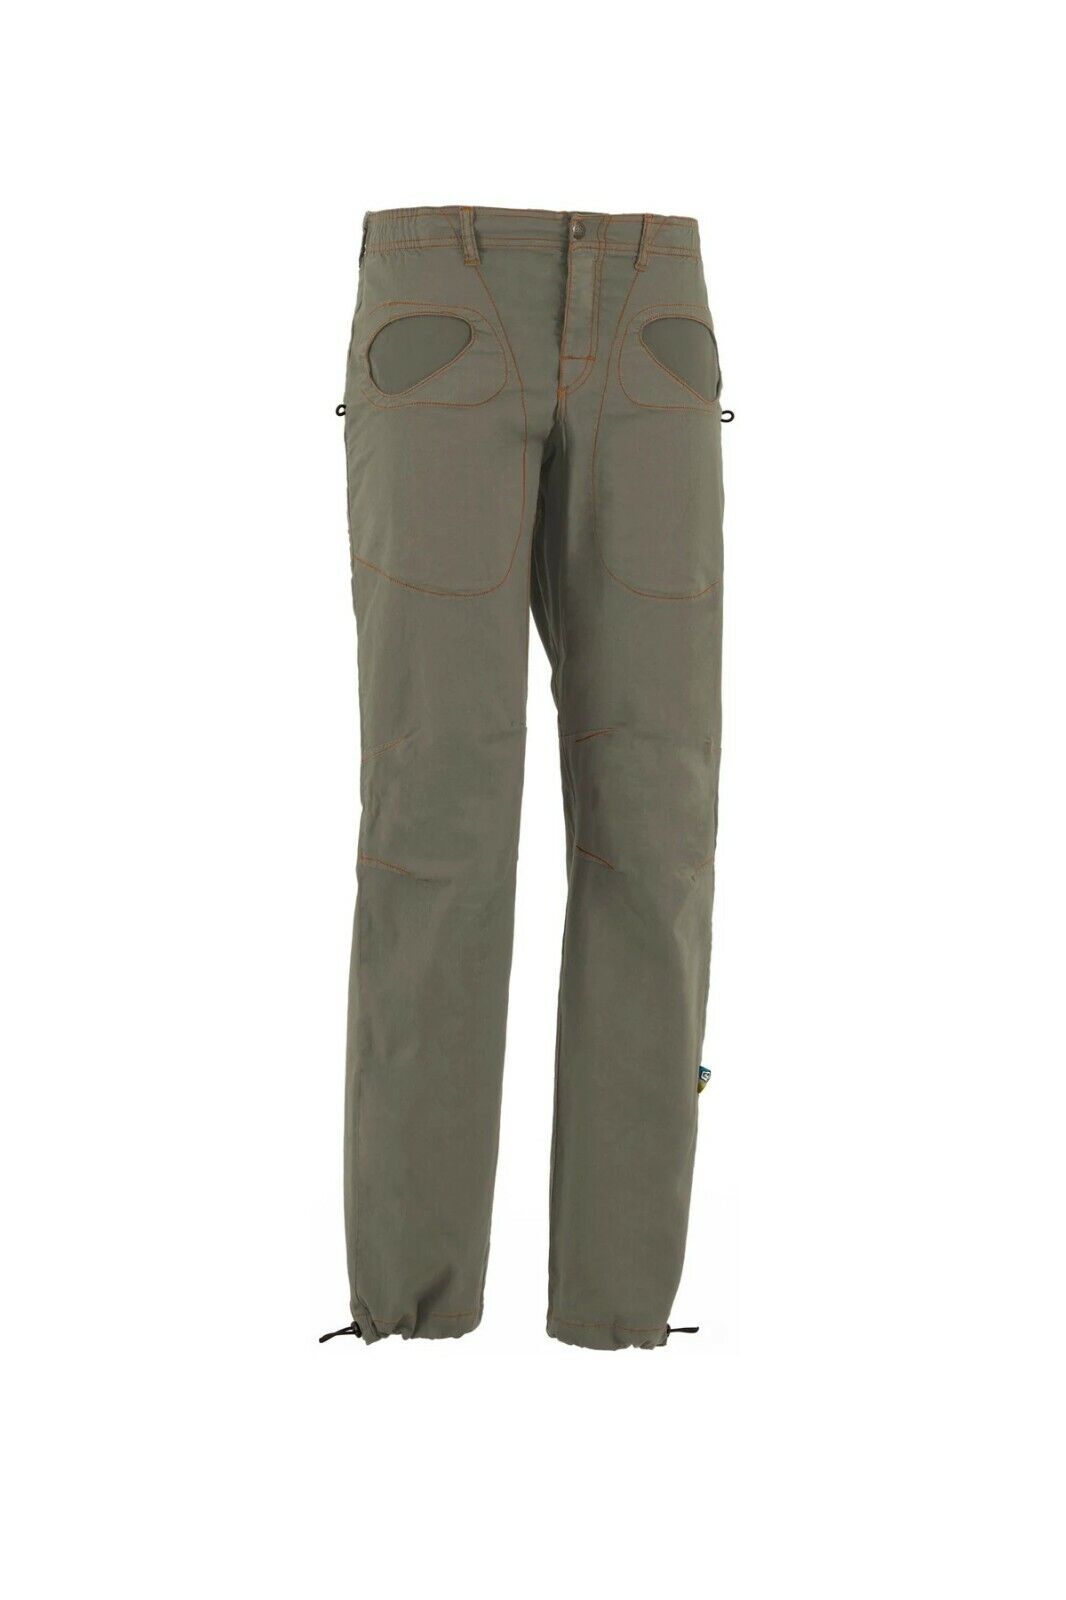 E9 Rondo Flax Climbing lowest Lowest price challenge price Pants Men's Storm for Grey